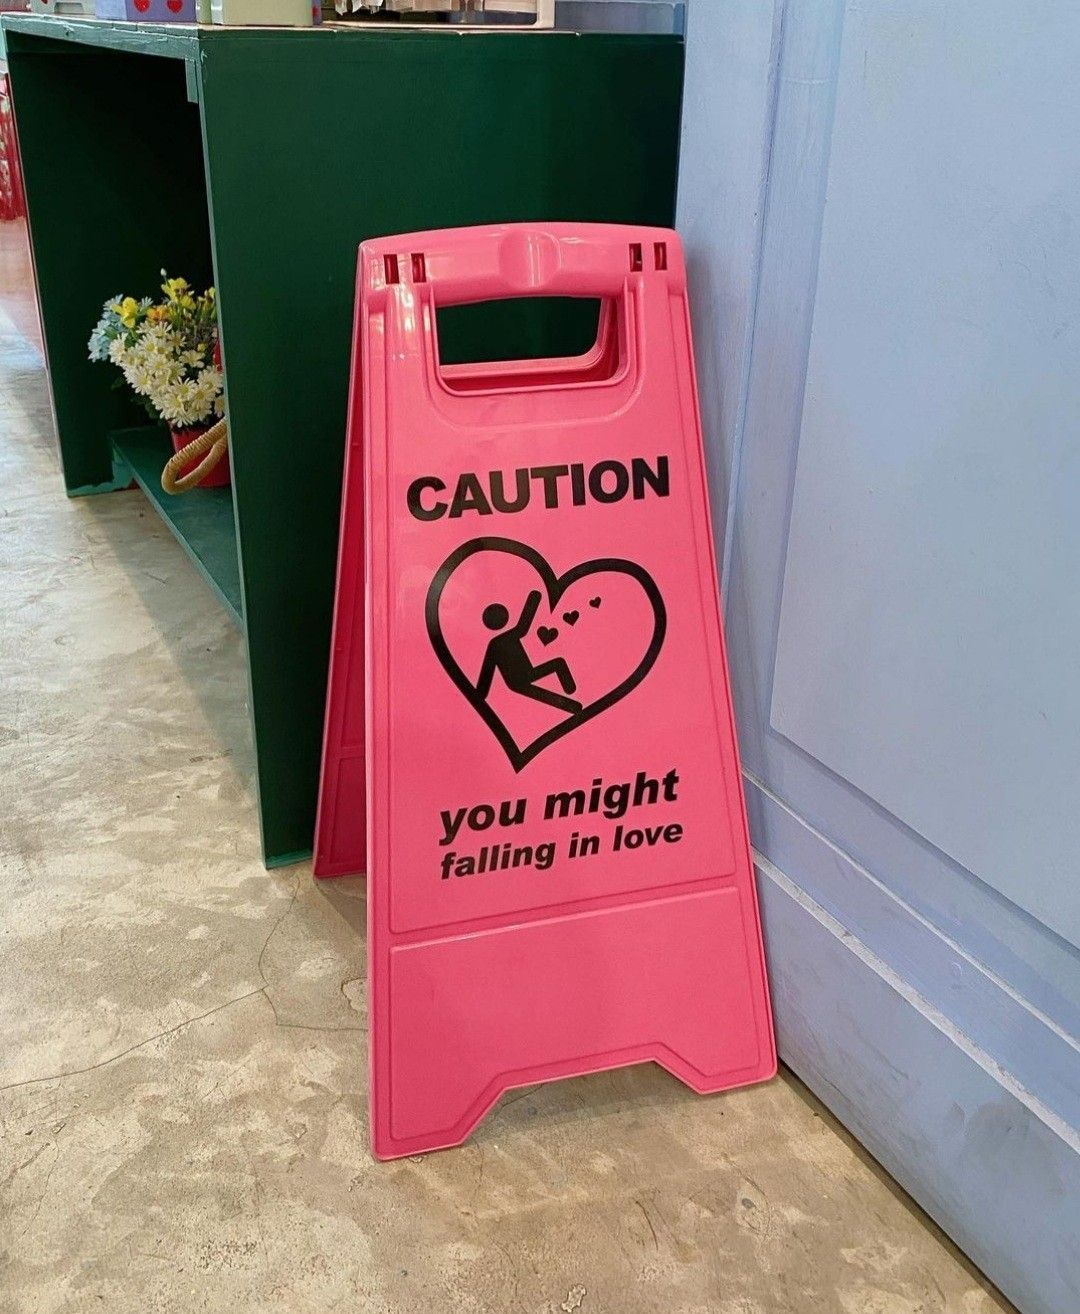 A pink caution sign that says 